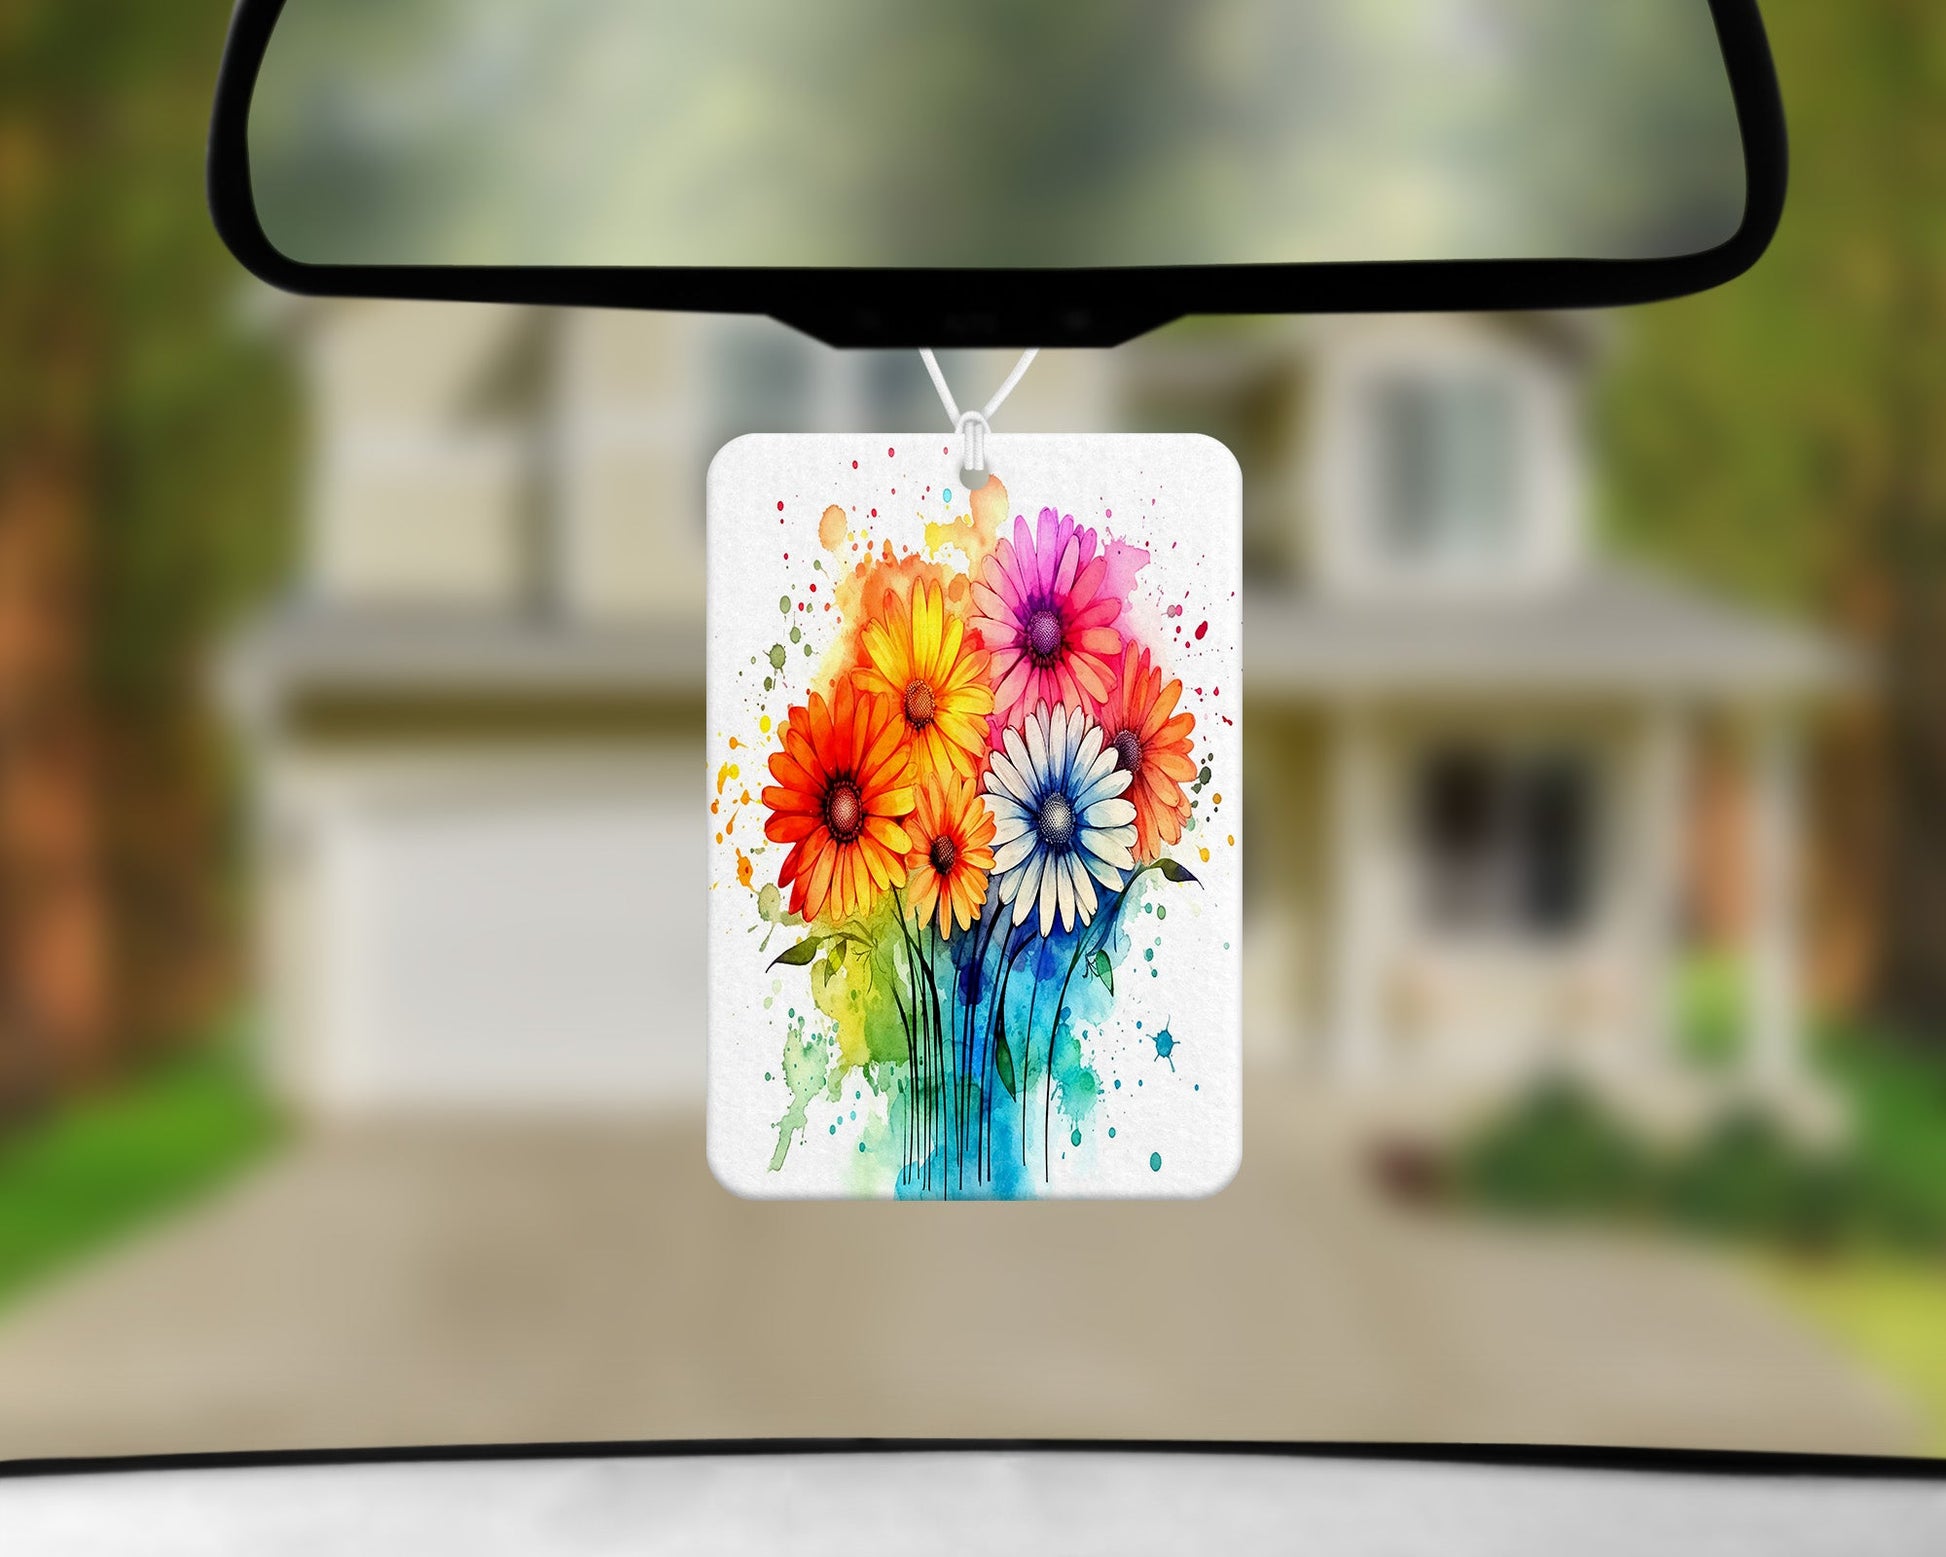 Watercolor Sunflower|Freshie|Includes Scent Bottle - Vehicle Air Freshener